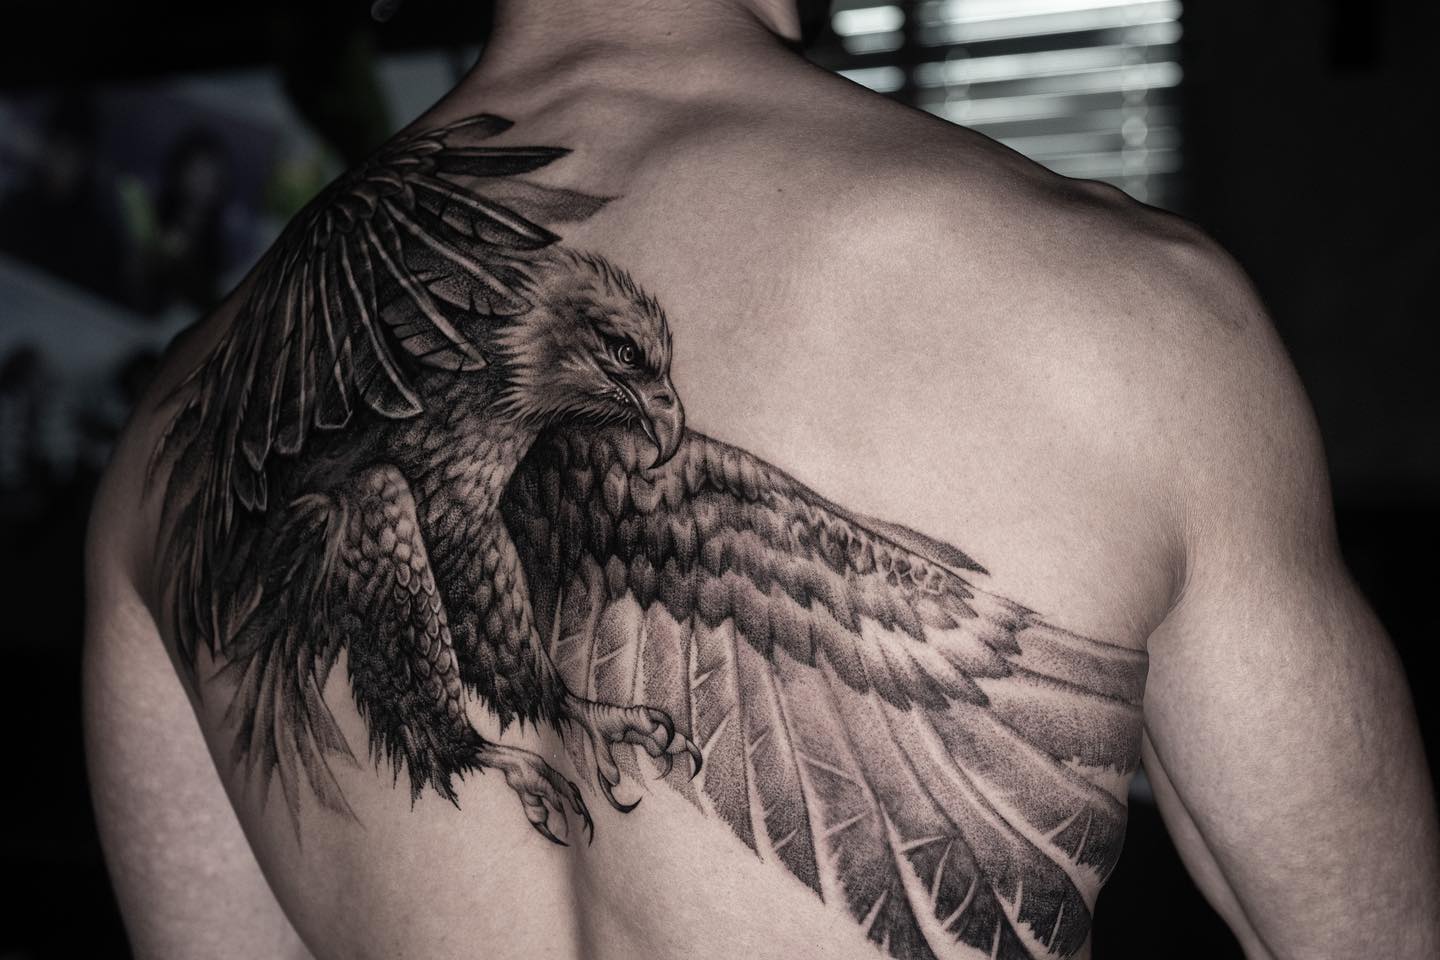 101 Best Back Pieces Tattoo Ideas That Will Blow Your Mind! - Outsons